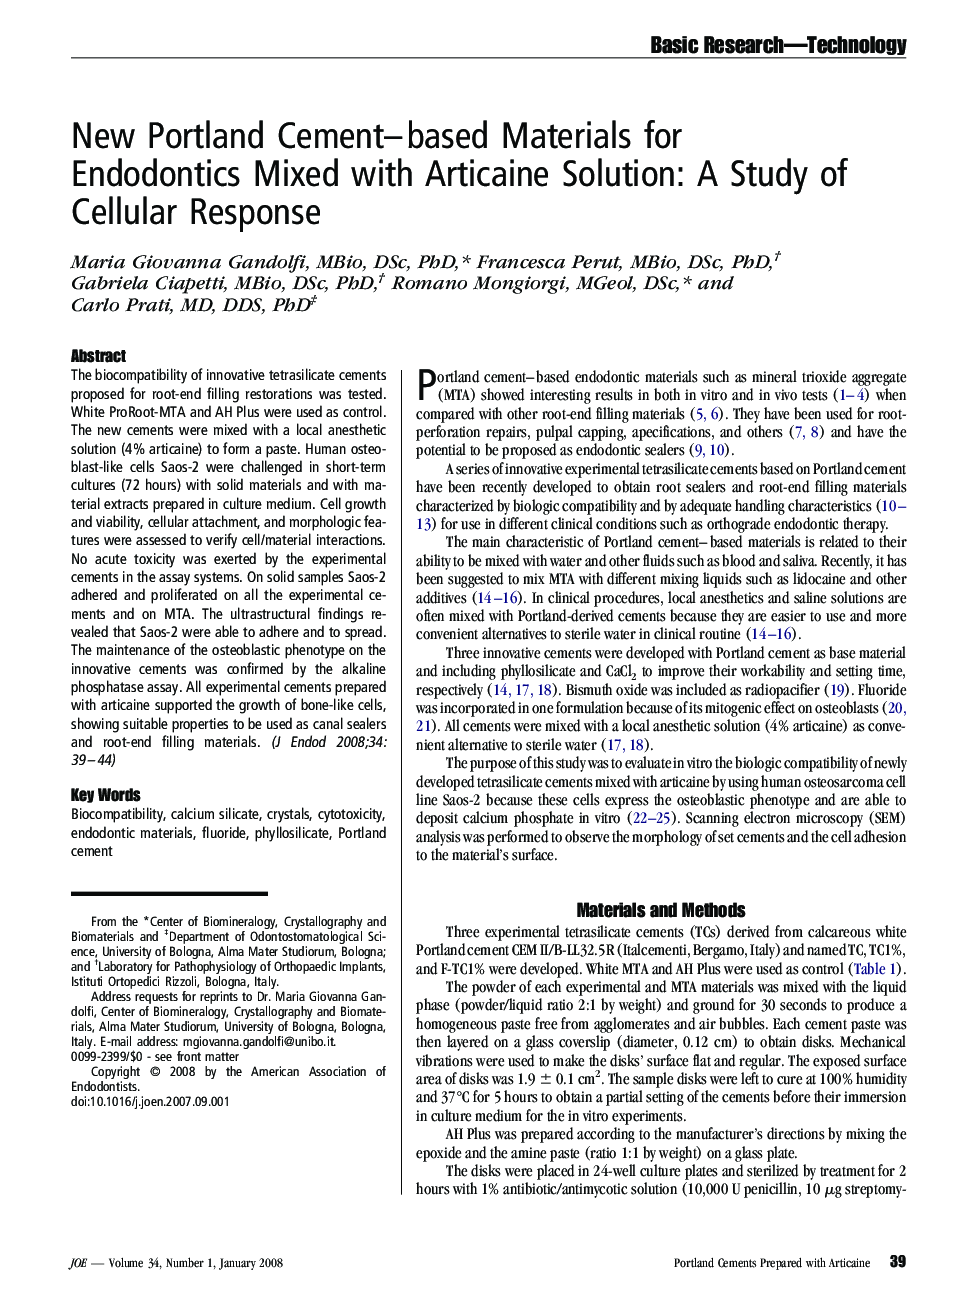 New Portland Cement–based Materials for Endodontics Mixed with Articaine Solution: A Study of Cellular Response